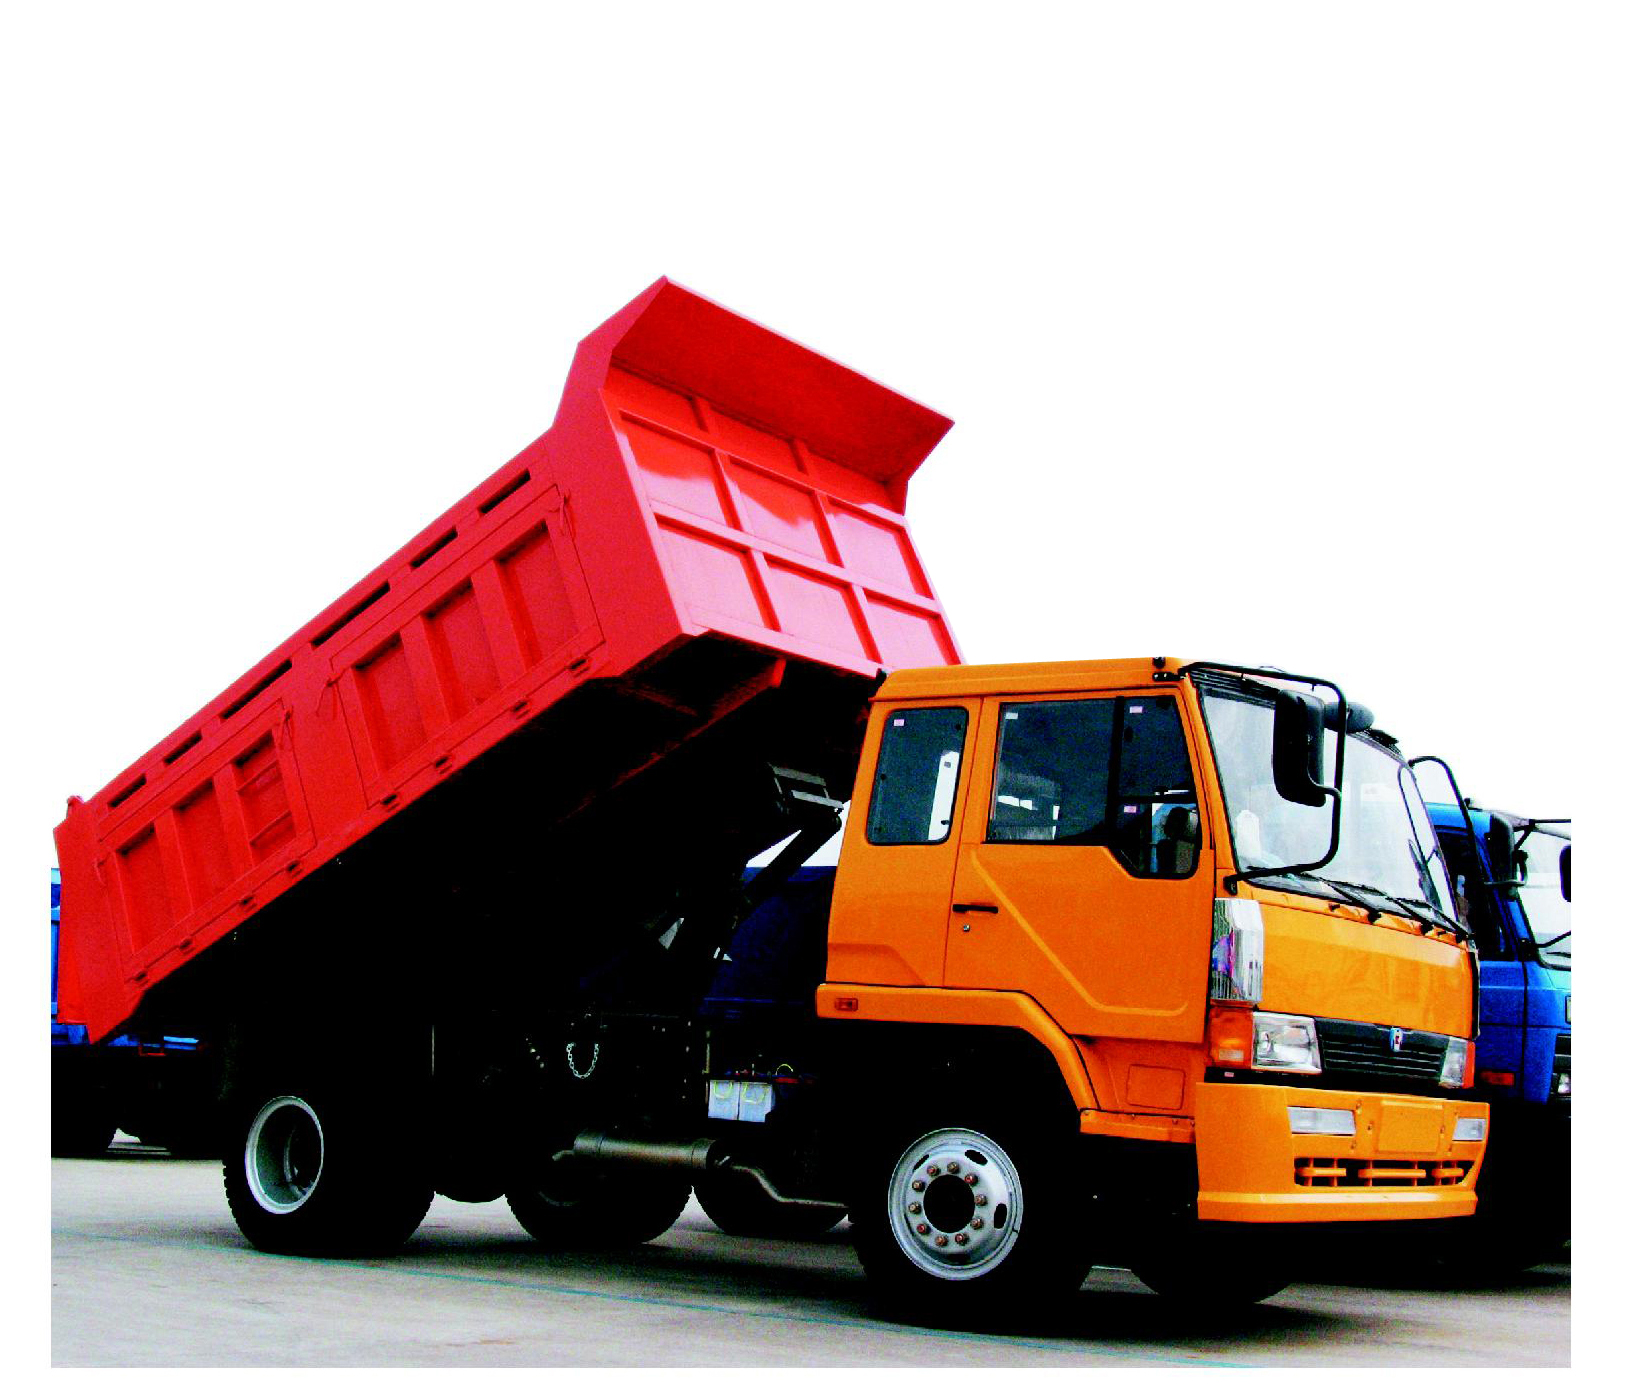 Top of the hydraulic cylinder Dump truck